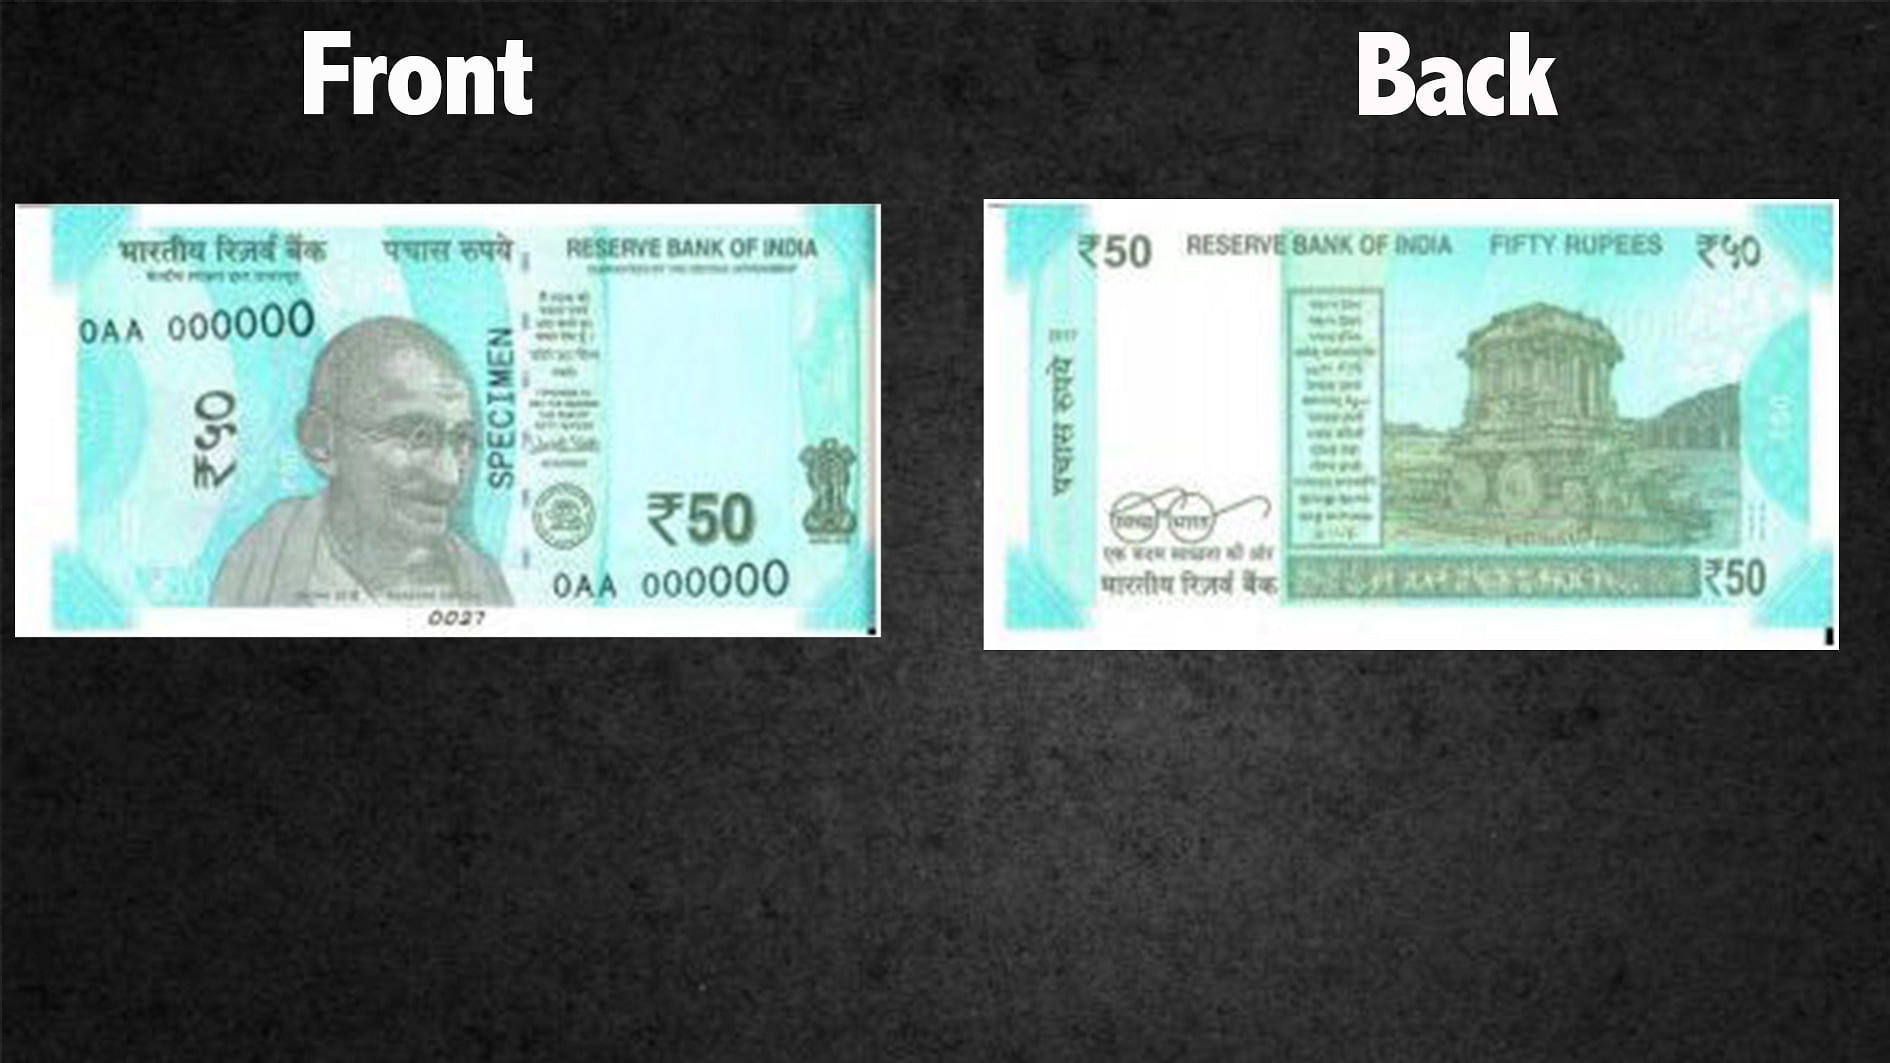 

In November 2016, new Rs 500 and Rs 2,000 currency notes were issued as part of PM Narendra Modi’s bid to curb the flow of black money in the economy.